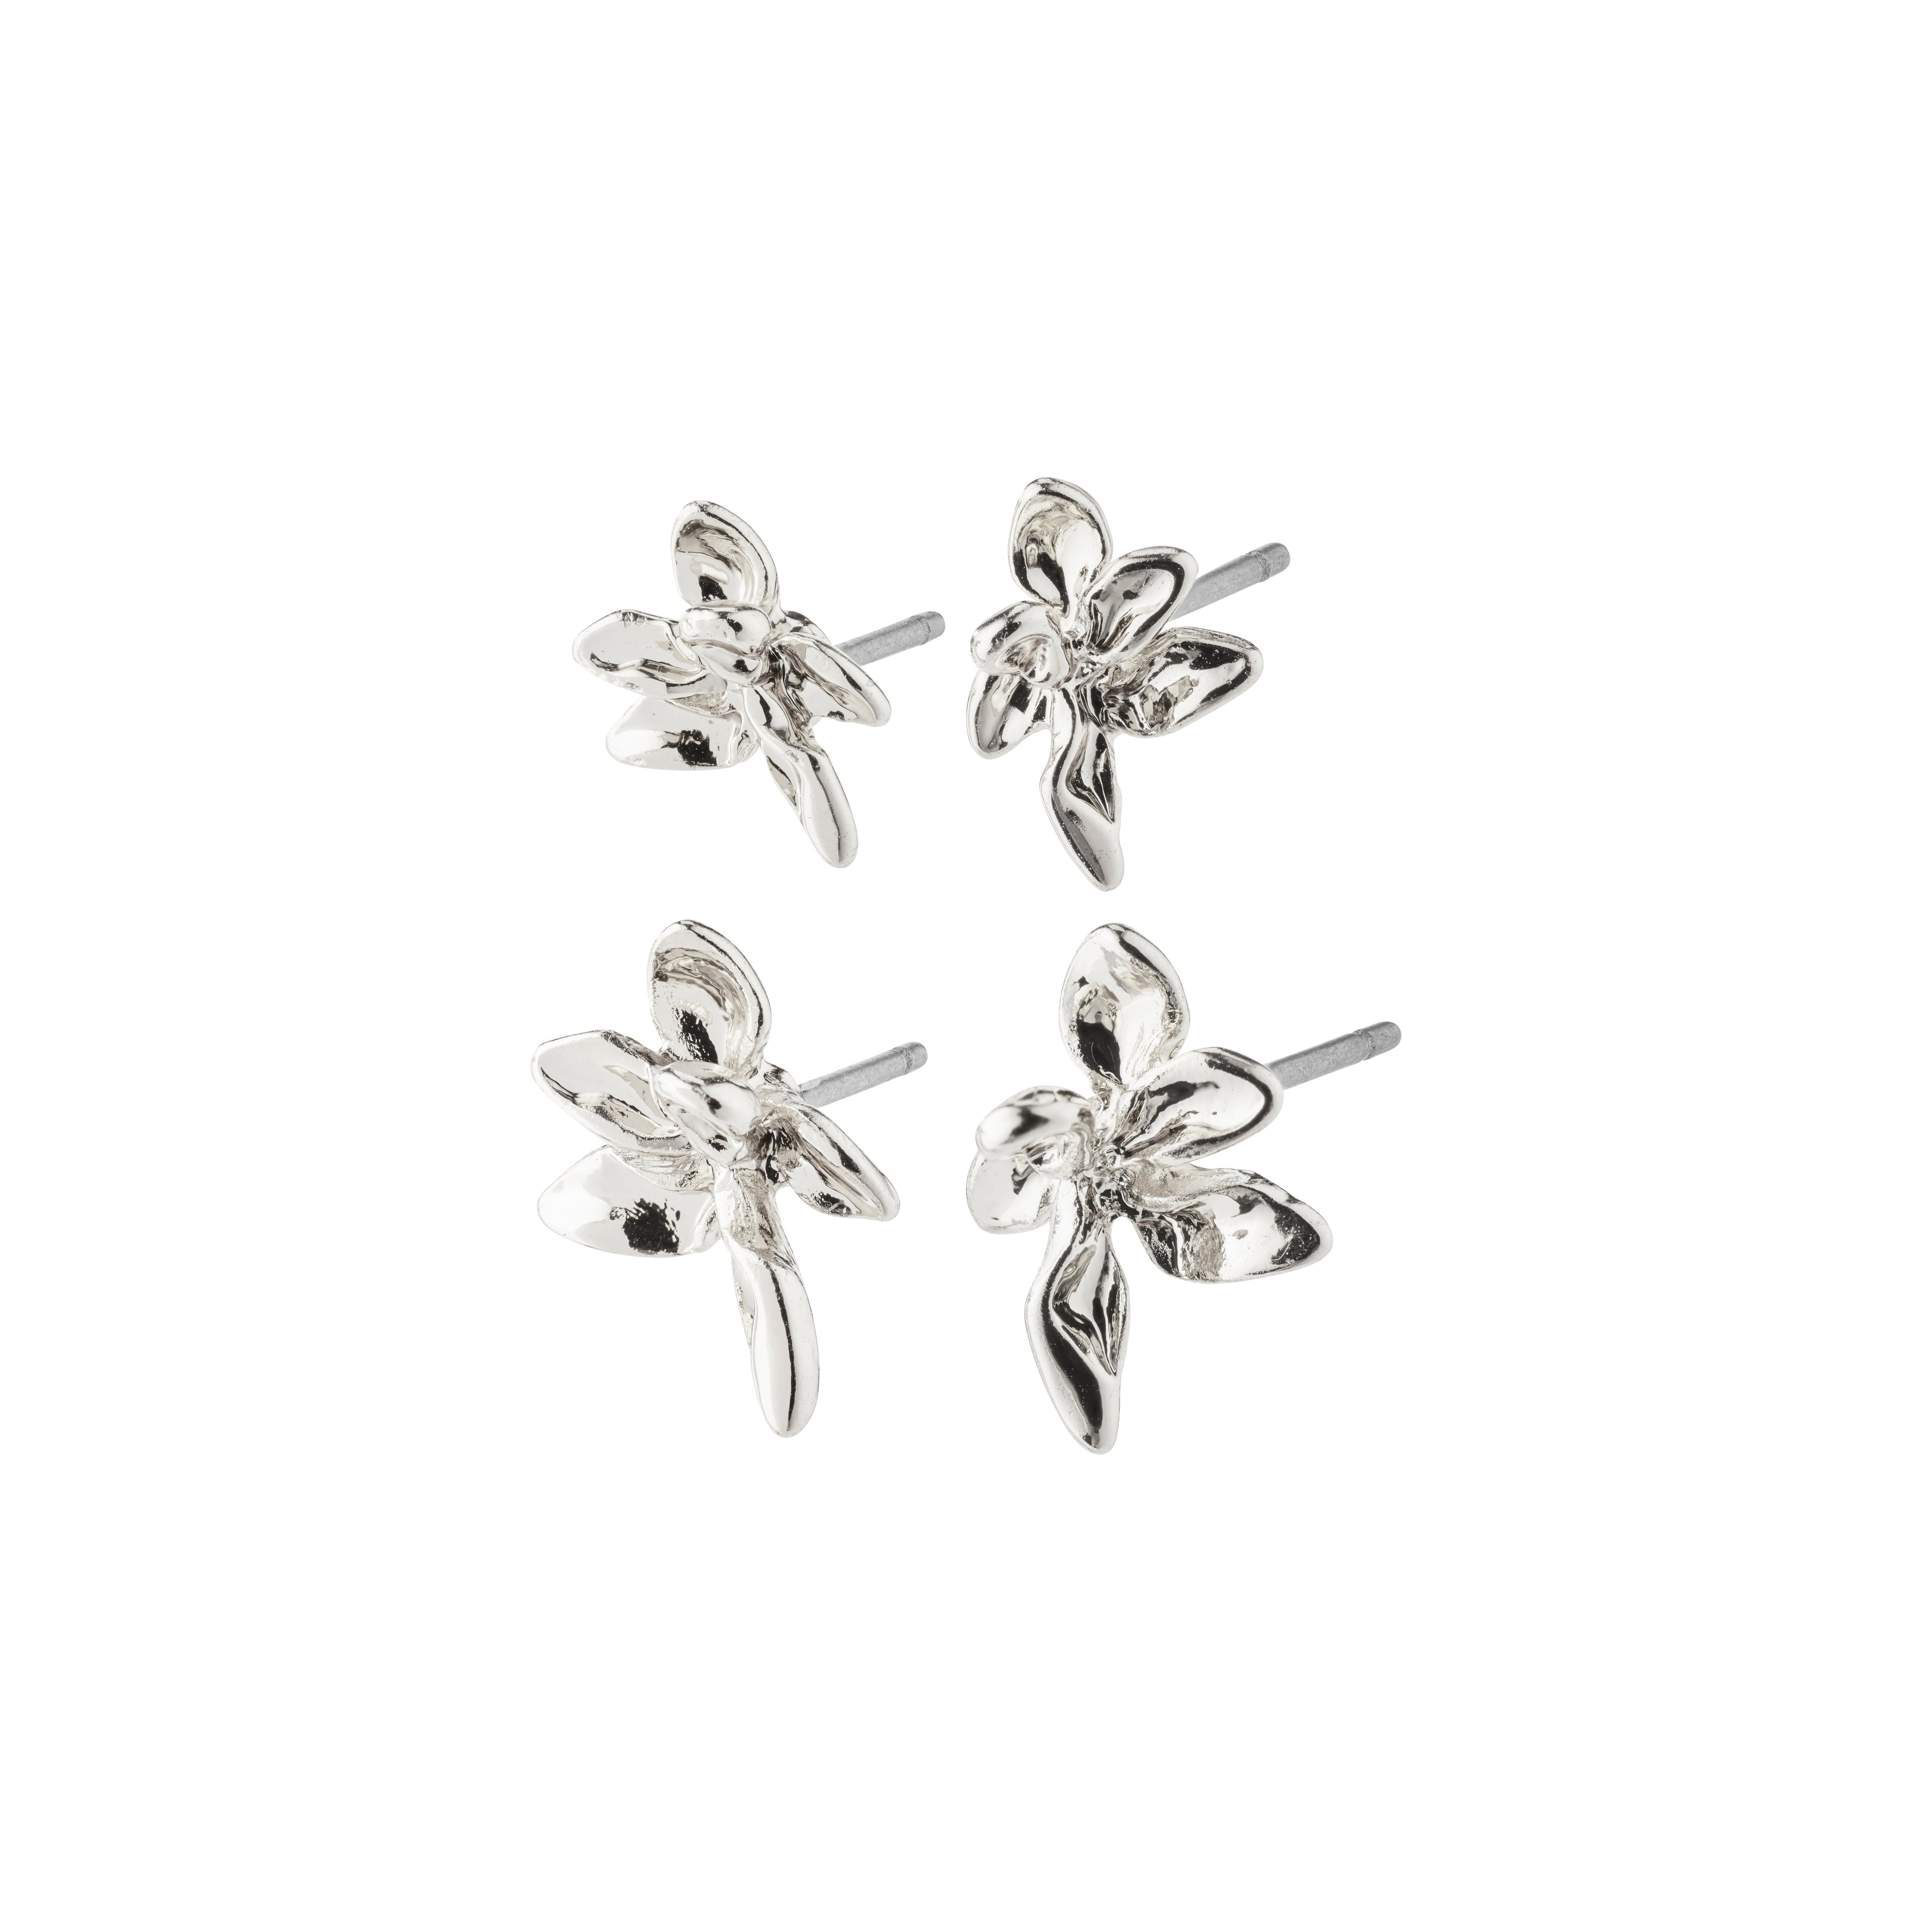 RIKO recycled earrings, 2-in-1 set, silver-plated